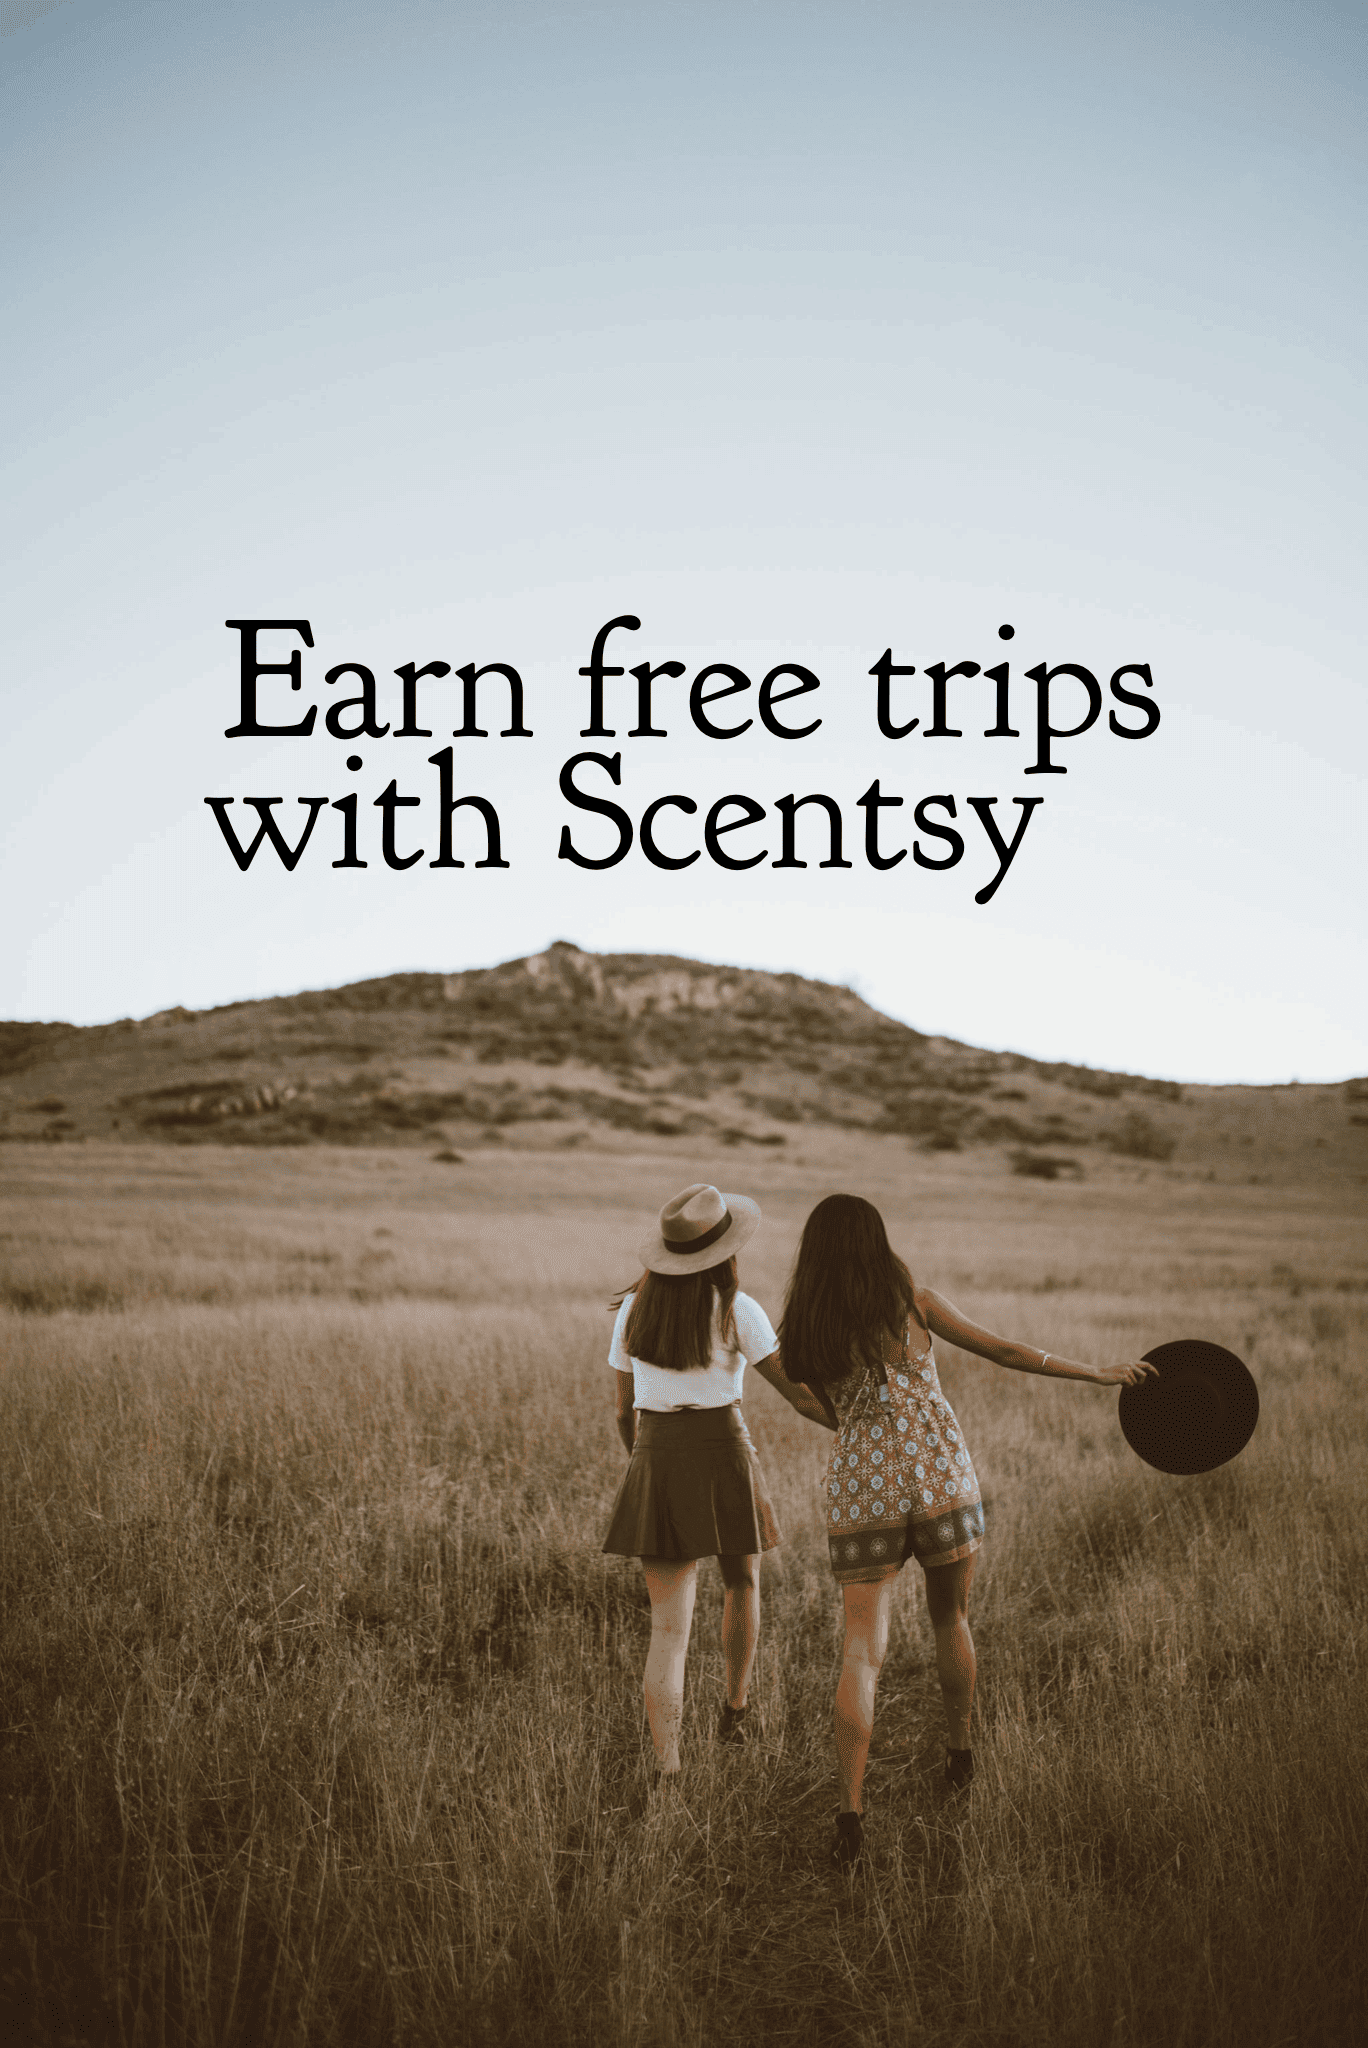 EARN a FREE trip with Scentsy